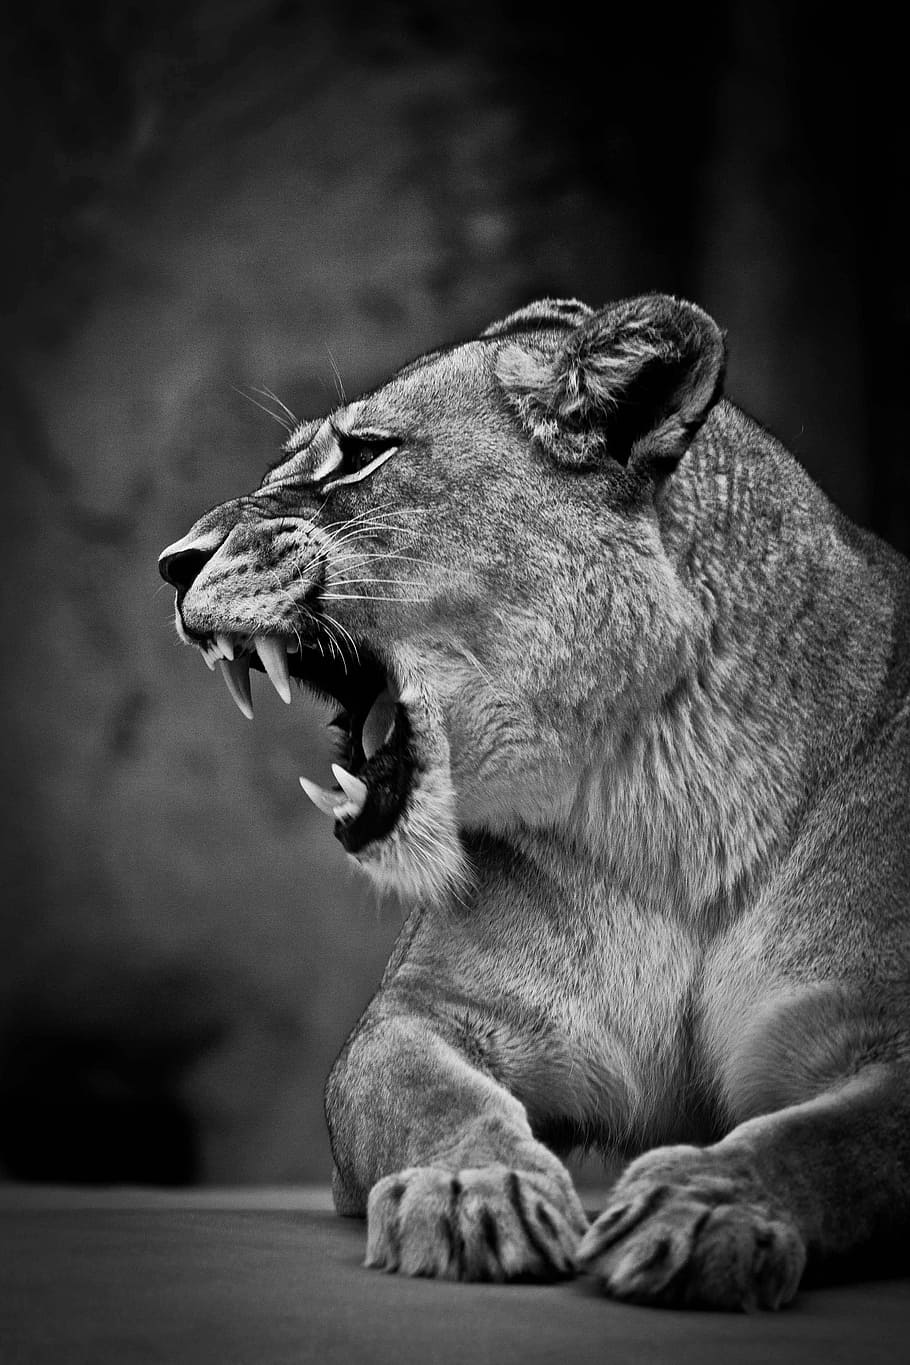 grayscale photo, lioness, predator, cat, angry, roar, fangs, tooth, teeth, wild animal